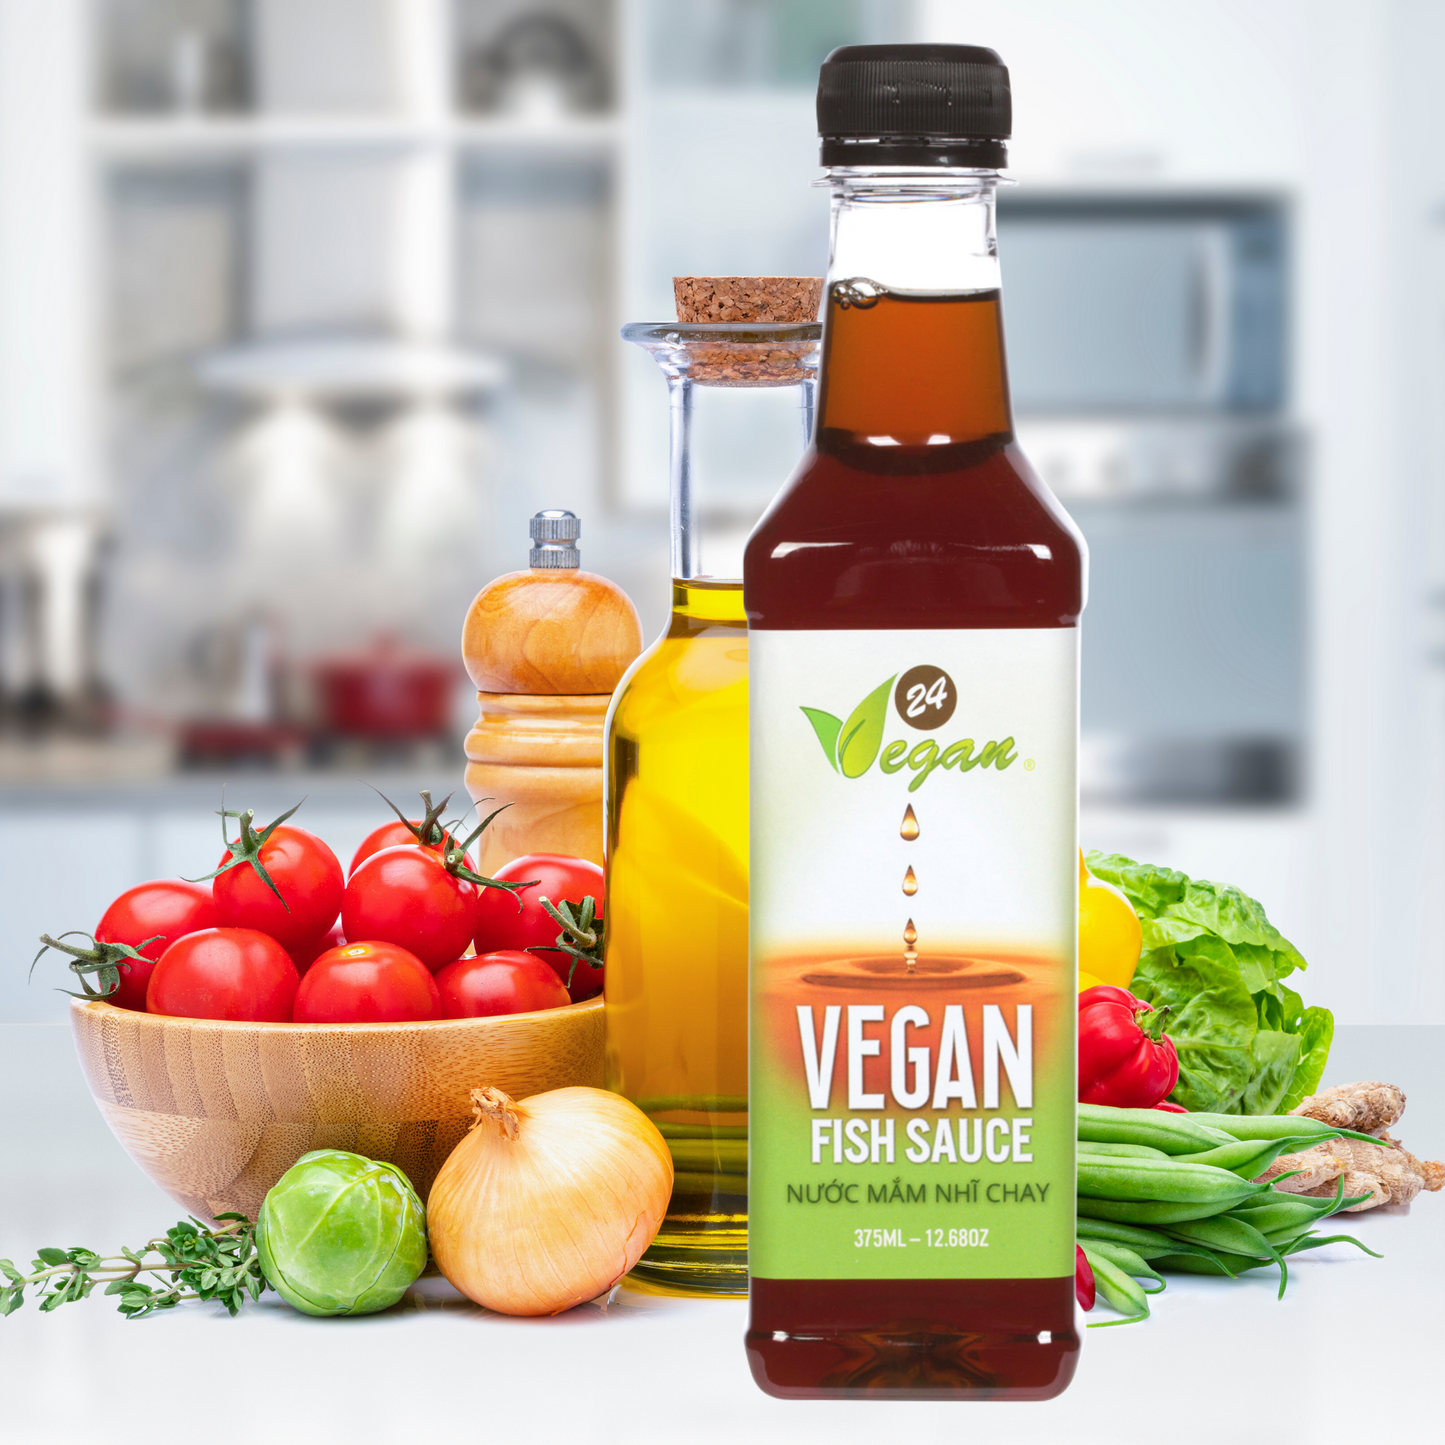 Picture of Vegan Fish Sauce in Branded Square bottle with vegetables and oils on a white counter